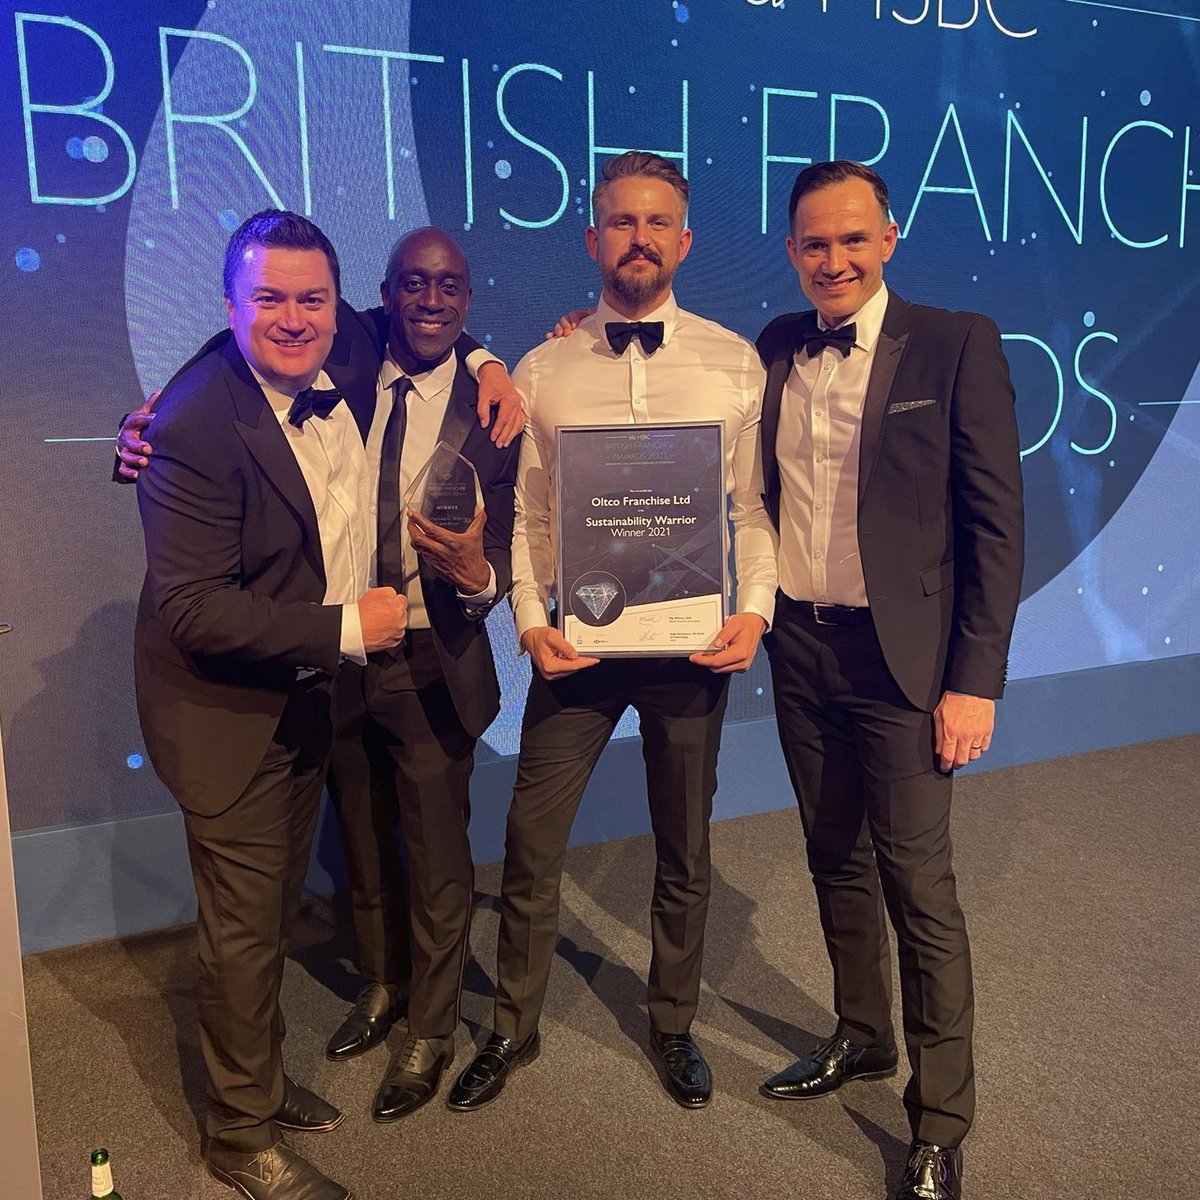 🏆 WINNERS!! 🏆

We are so proud to be announced as WINNERS at the #BFAawards. #Oltco took home the trophy for #SustainabilityWarrior and we are BUZZING! 🙌We never could have done this without our network of amazing franchisees. 💚What a way to wrap up an awesome year! 🍾